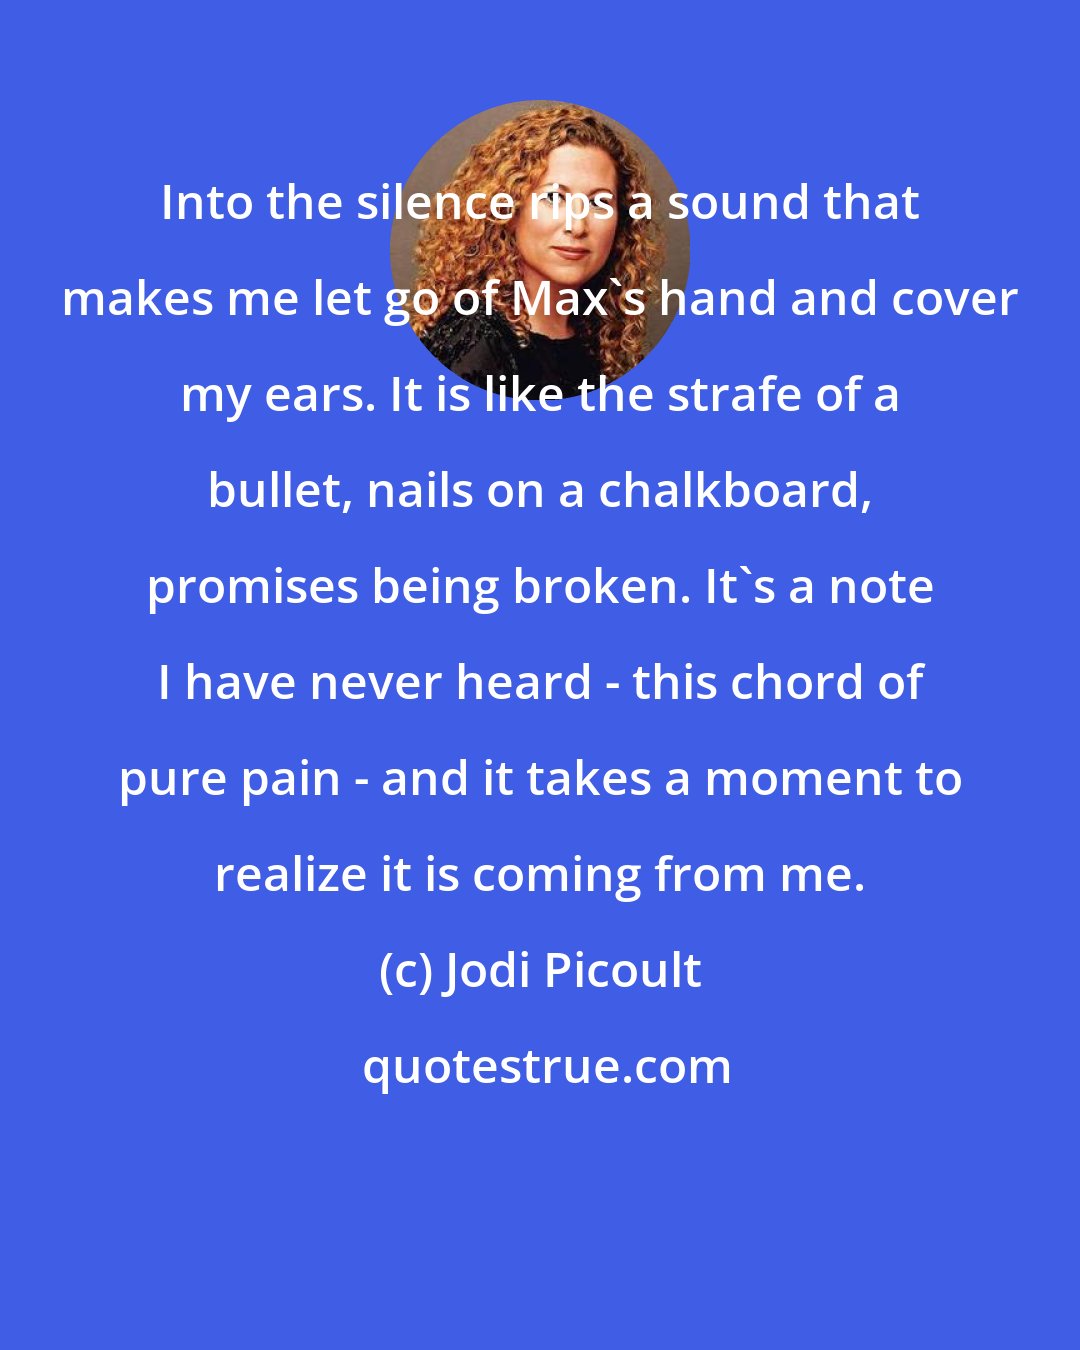 Jodi Picoult: Into the silence rips a sound that makes me let go of Max's hand and cover my ears. It is like the strafe of a bullet, nails on a chalkboard, promises being broken. It's a note I have never heard - this chord of pure pain - and it takes a moment to realize it is coming from me.